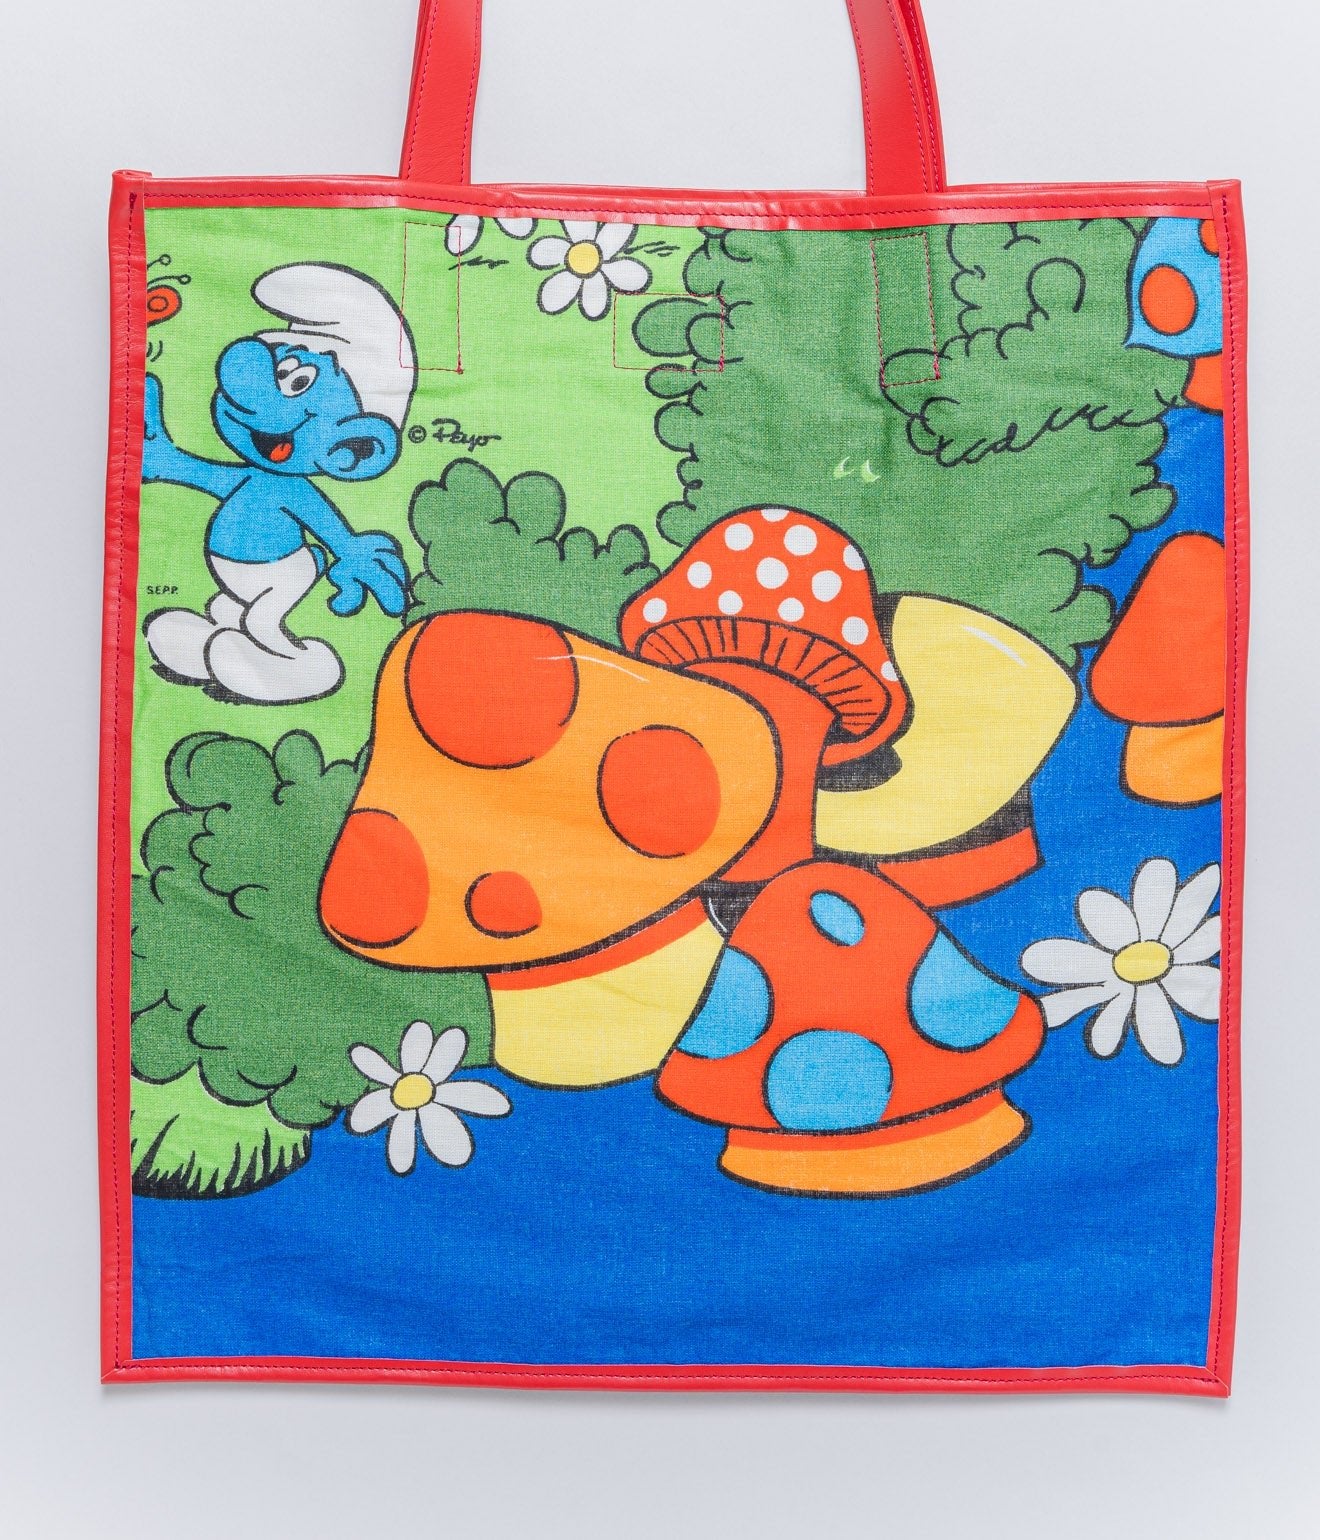 WEAREALLANIMALS UPCYCLE ”Piping Flat Tote -Vintage Smurf Fabric-" #10 - WEAREALLANIMALS